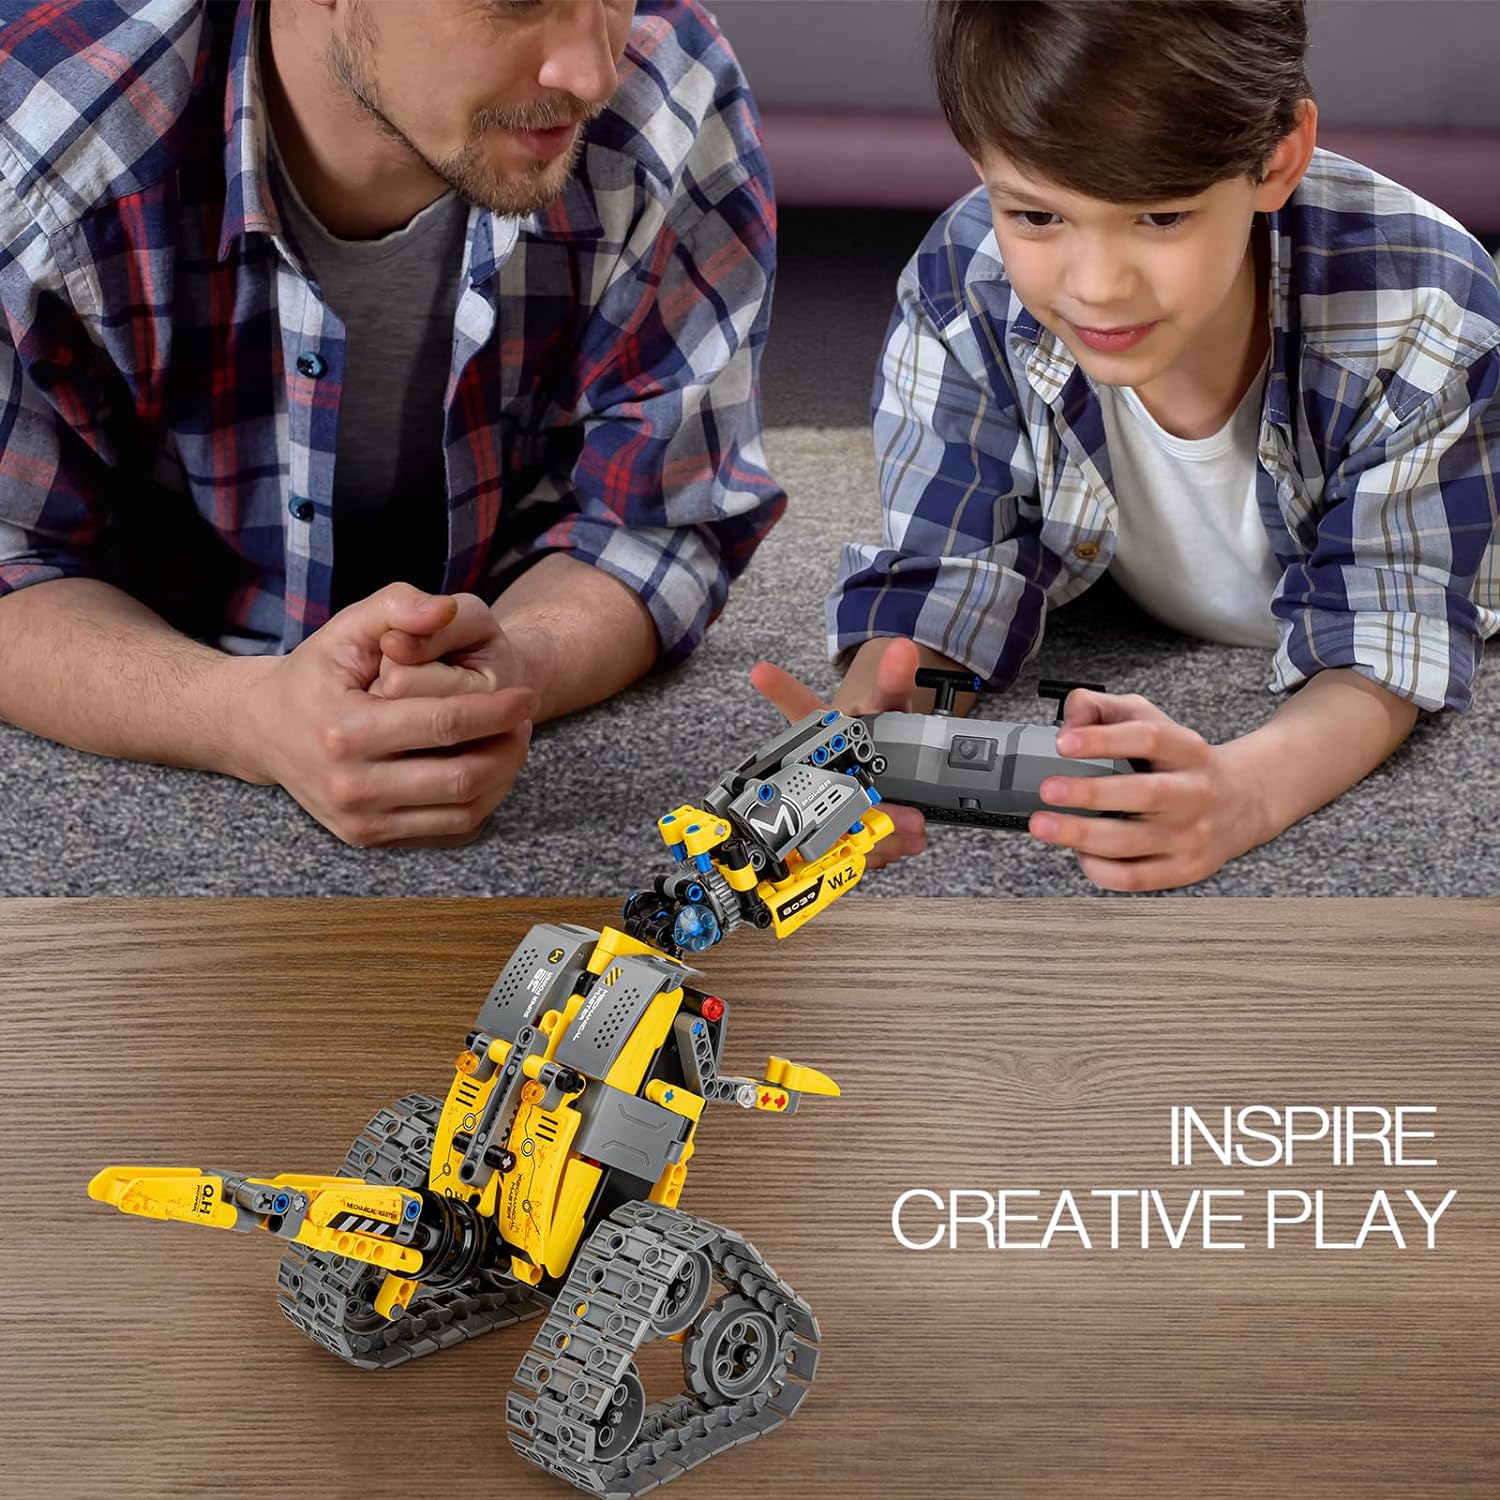 Sillbird STEM Building Toys, Remote APP Controlled Creator 3in1 Wall Robot/Explorer Robot/Mech Dinosaur Toys Set, Creative Gifts for Boys Girls Kids Aged 6 7 8-12, New 2022 (434 Pieces) : Toys Games